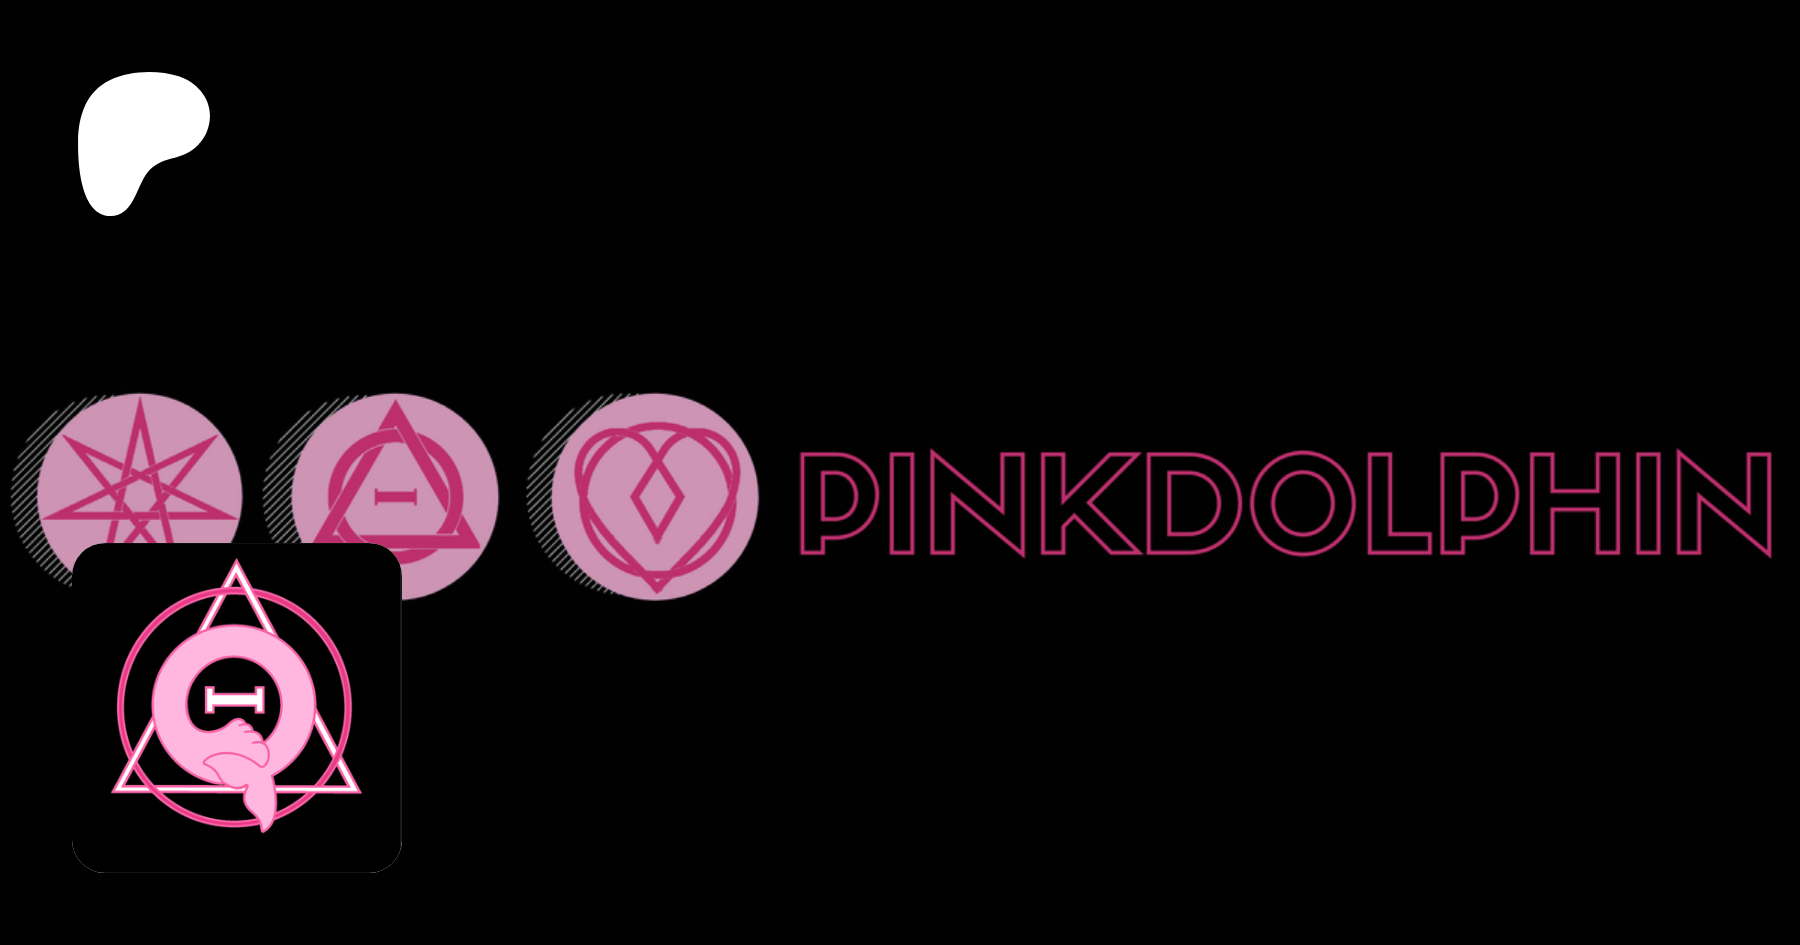 PD pinkdolphin, creating therian videos, blogs & more.